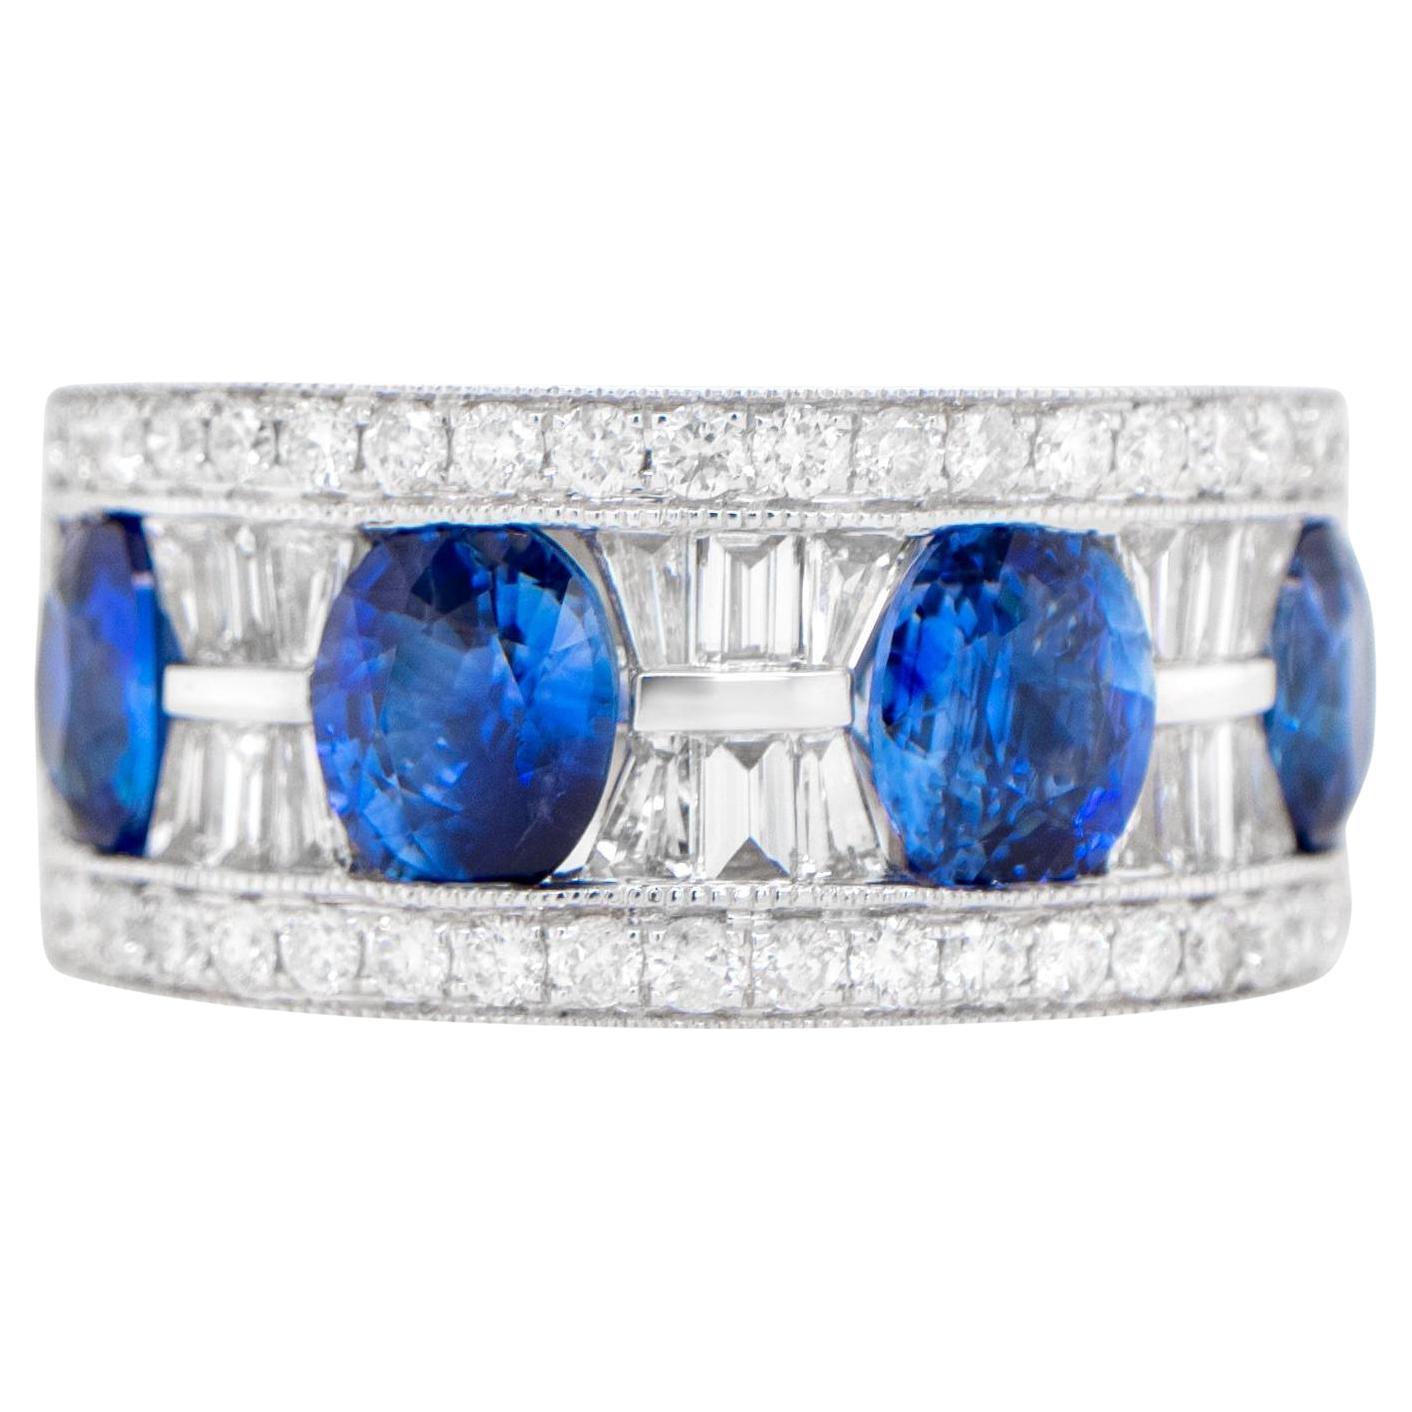 Blue Sapphire Ring With Diamonds 4.25 Carats 18K White Gold For Sale